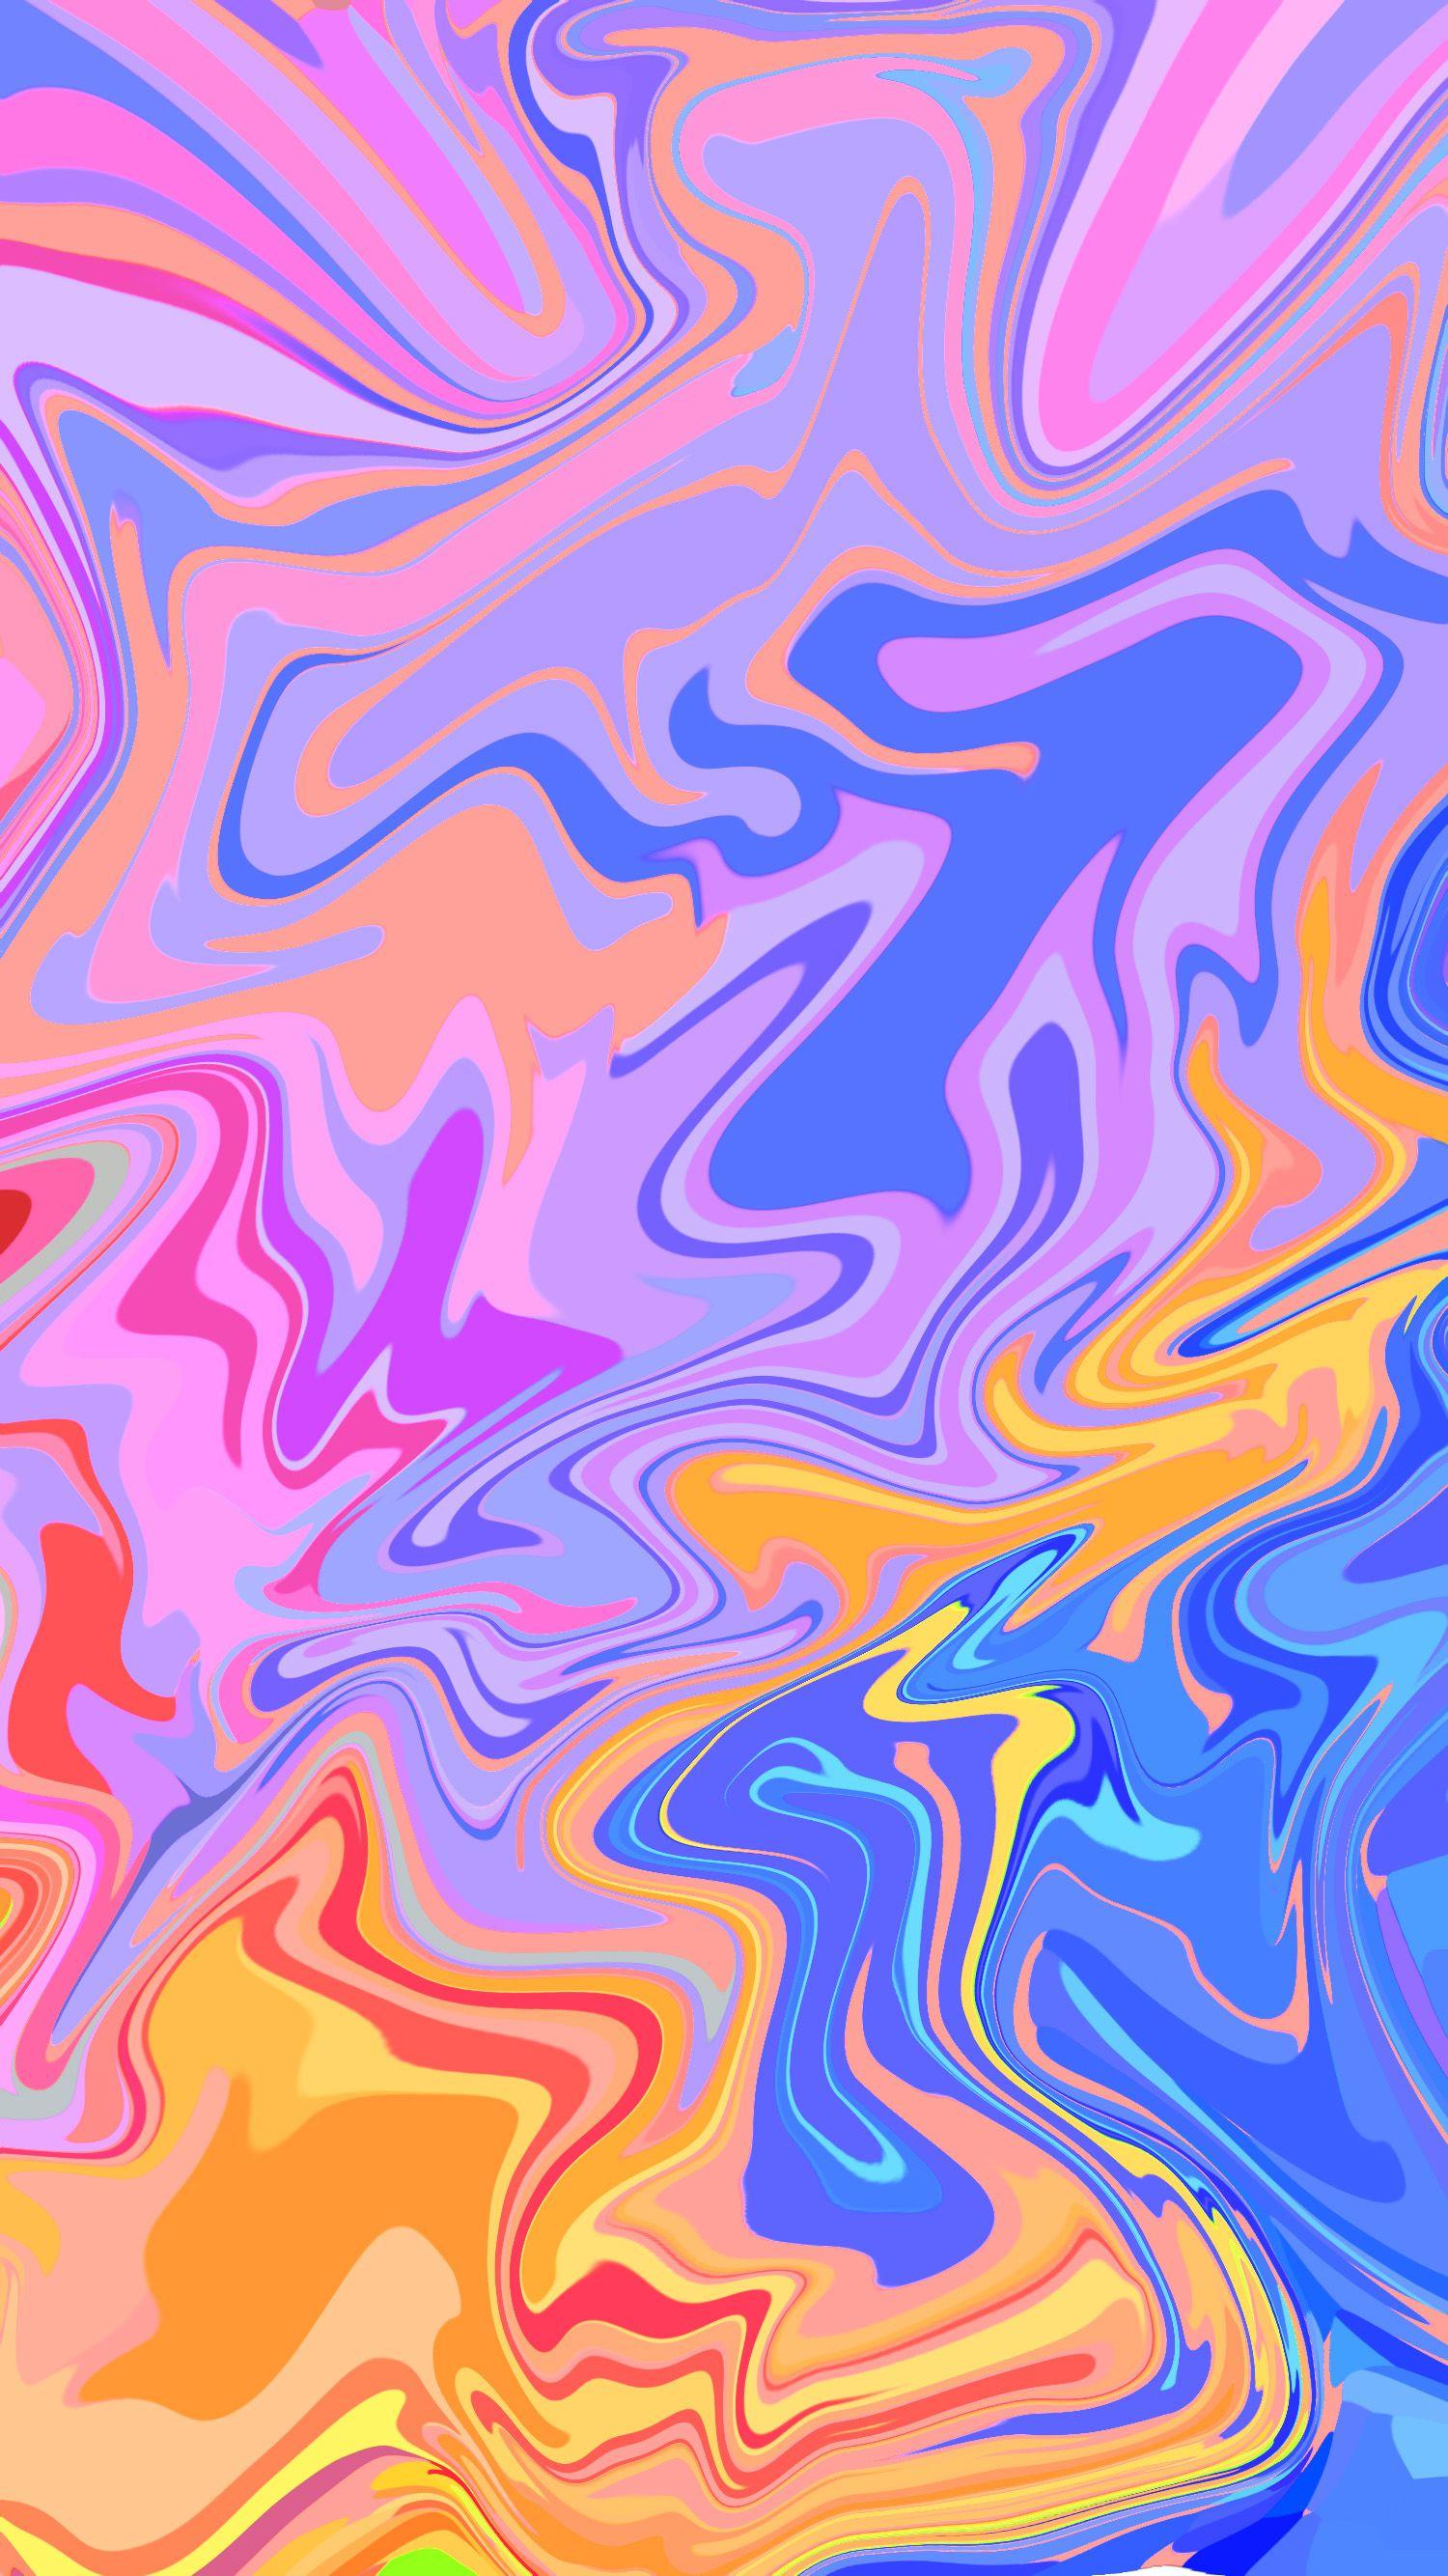 A colorful abstract background with pink, blue, and yellow colors. - Design